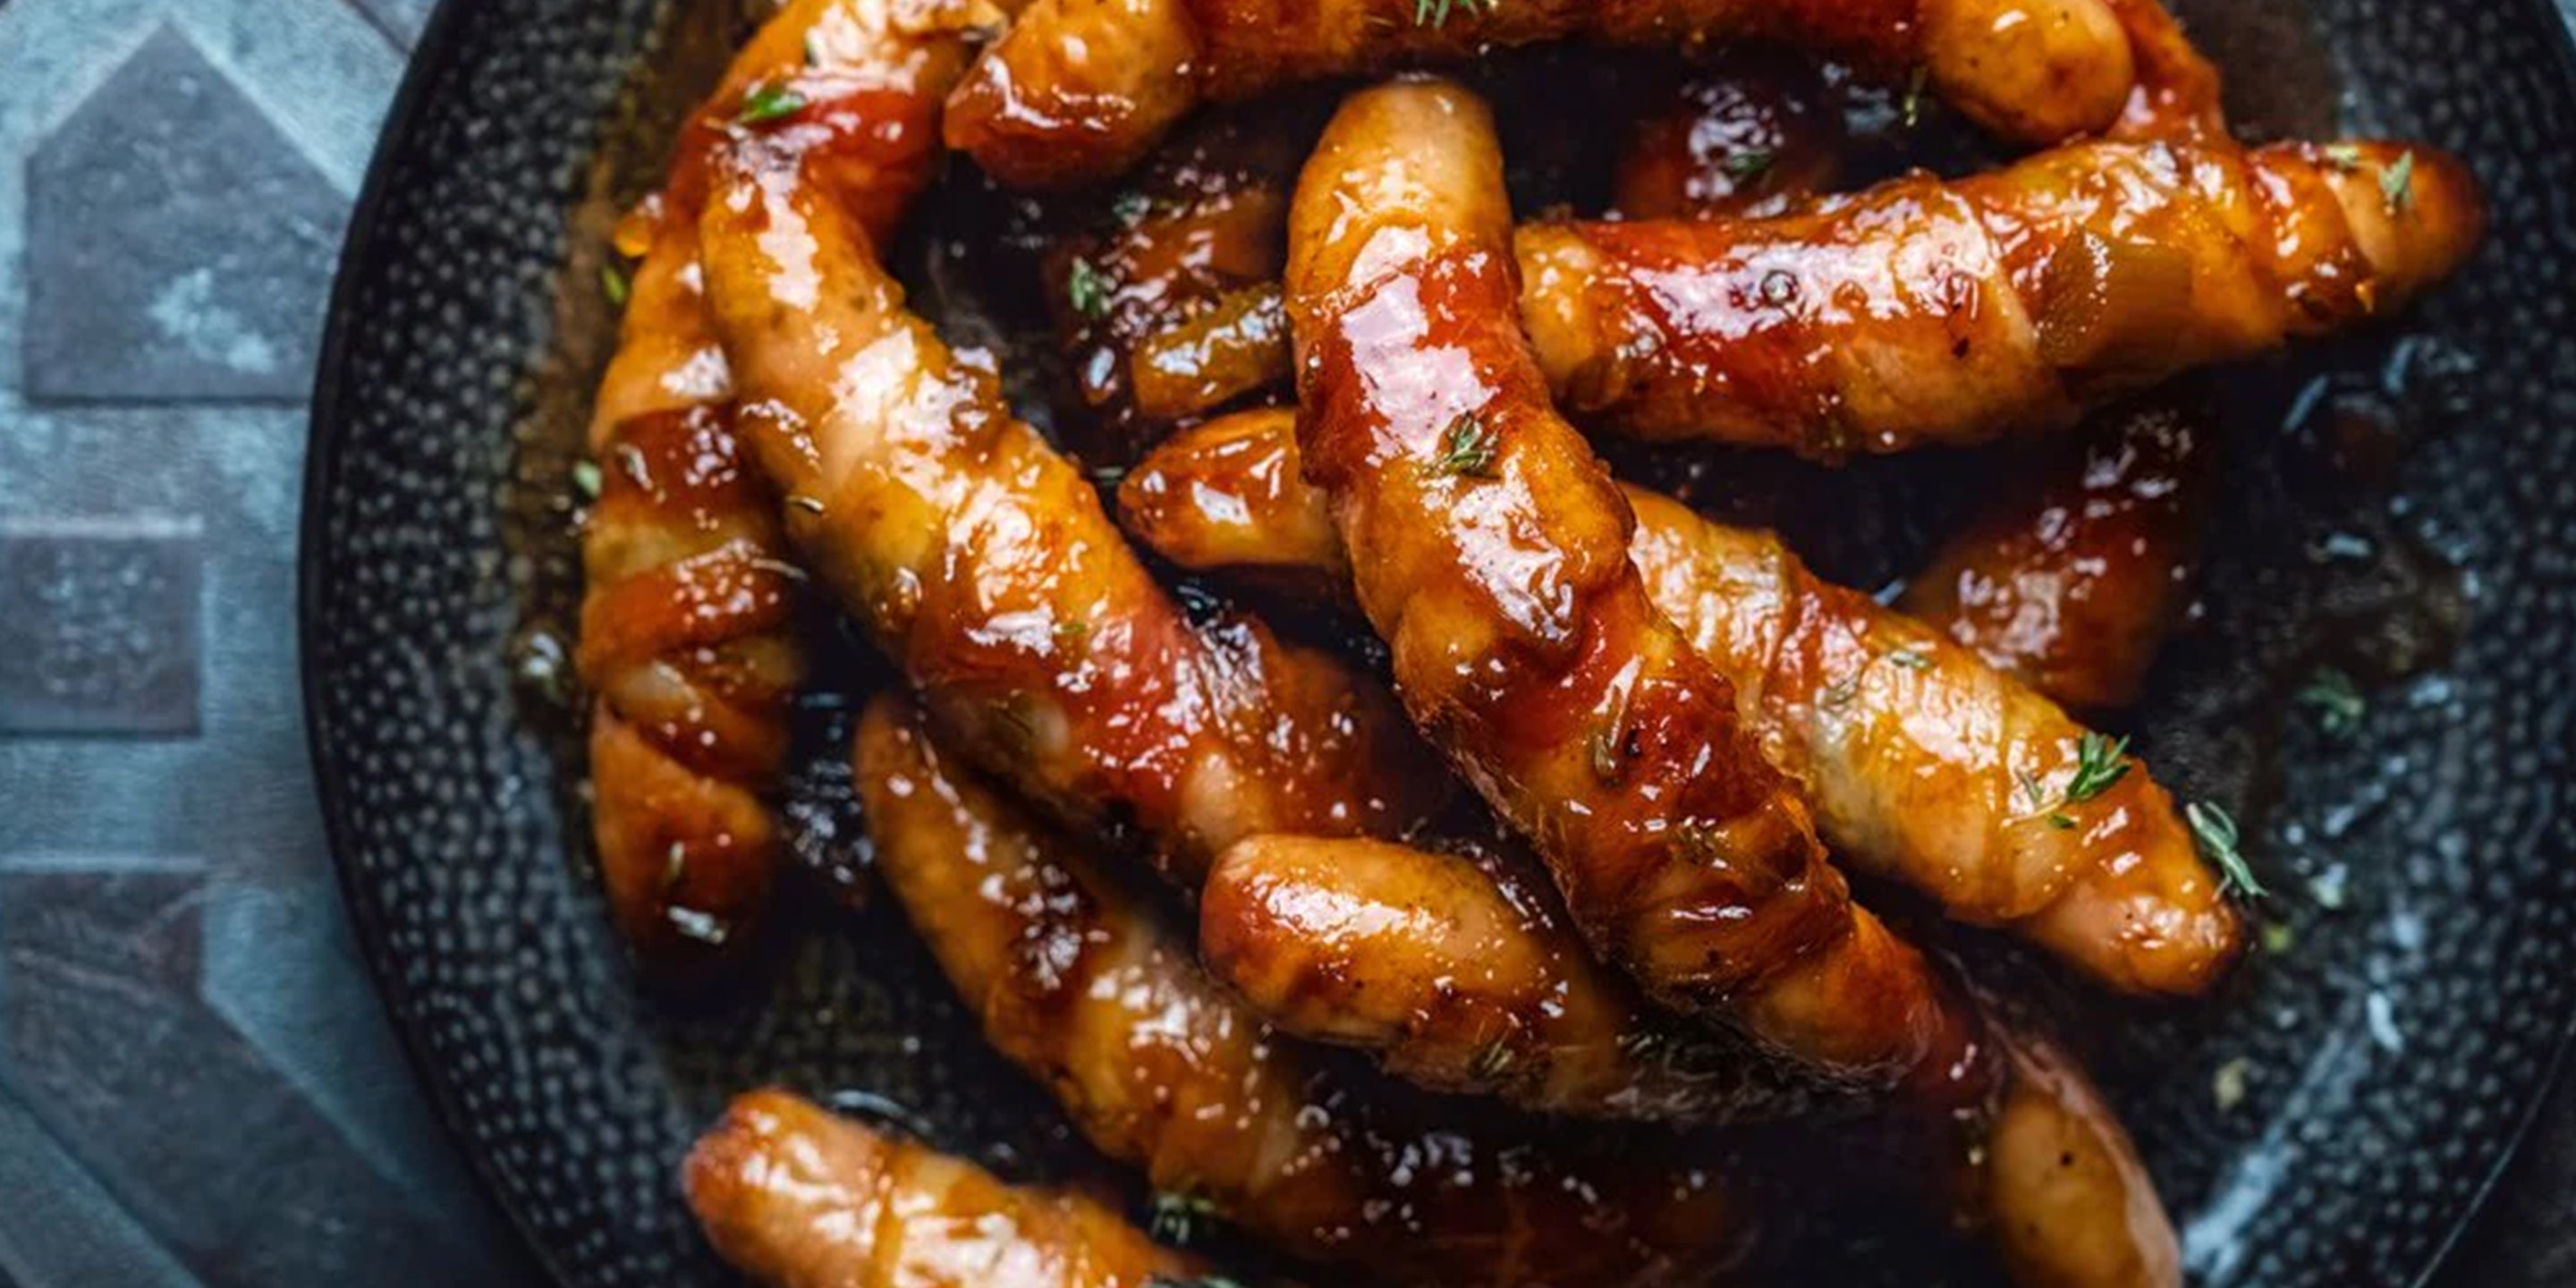 A Delicious Christmas Recipe, Pigs in Blankets, in Collaboration with Paul Robinson, Yorkshire Gourmet